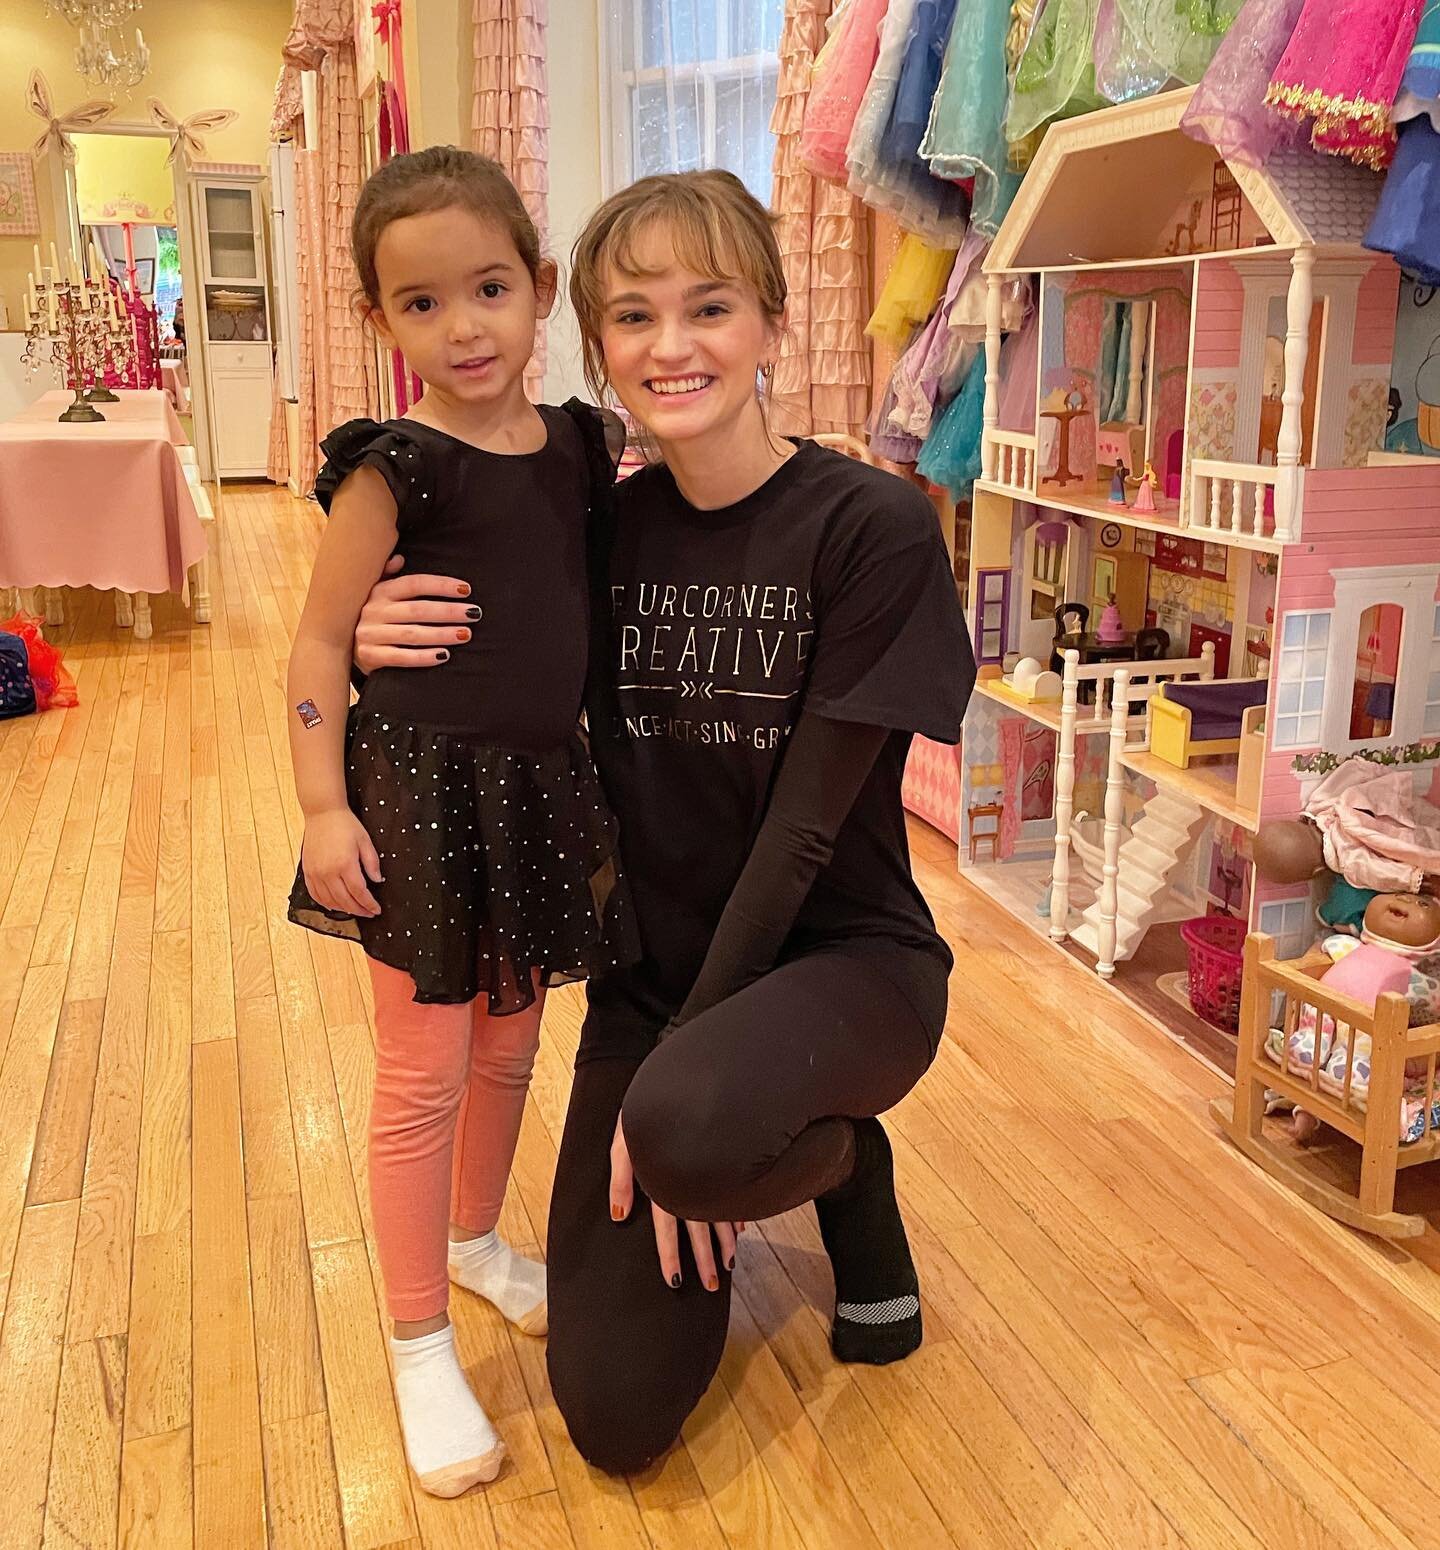 There is still time to join Miss Mallory tomorrow at our Twinkle Toes ballet class in Chelsea! Email us hello@fourcornerscreative.com to reserve a spot. 

⭐️
⭐️
⭐️
⭐️
⭐️

#kidsperformingarts #nyceducation #nyc #nyckids #nycactors #nycdancers #nycsing